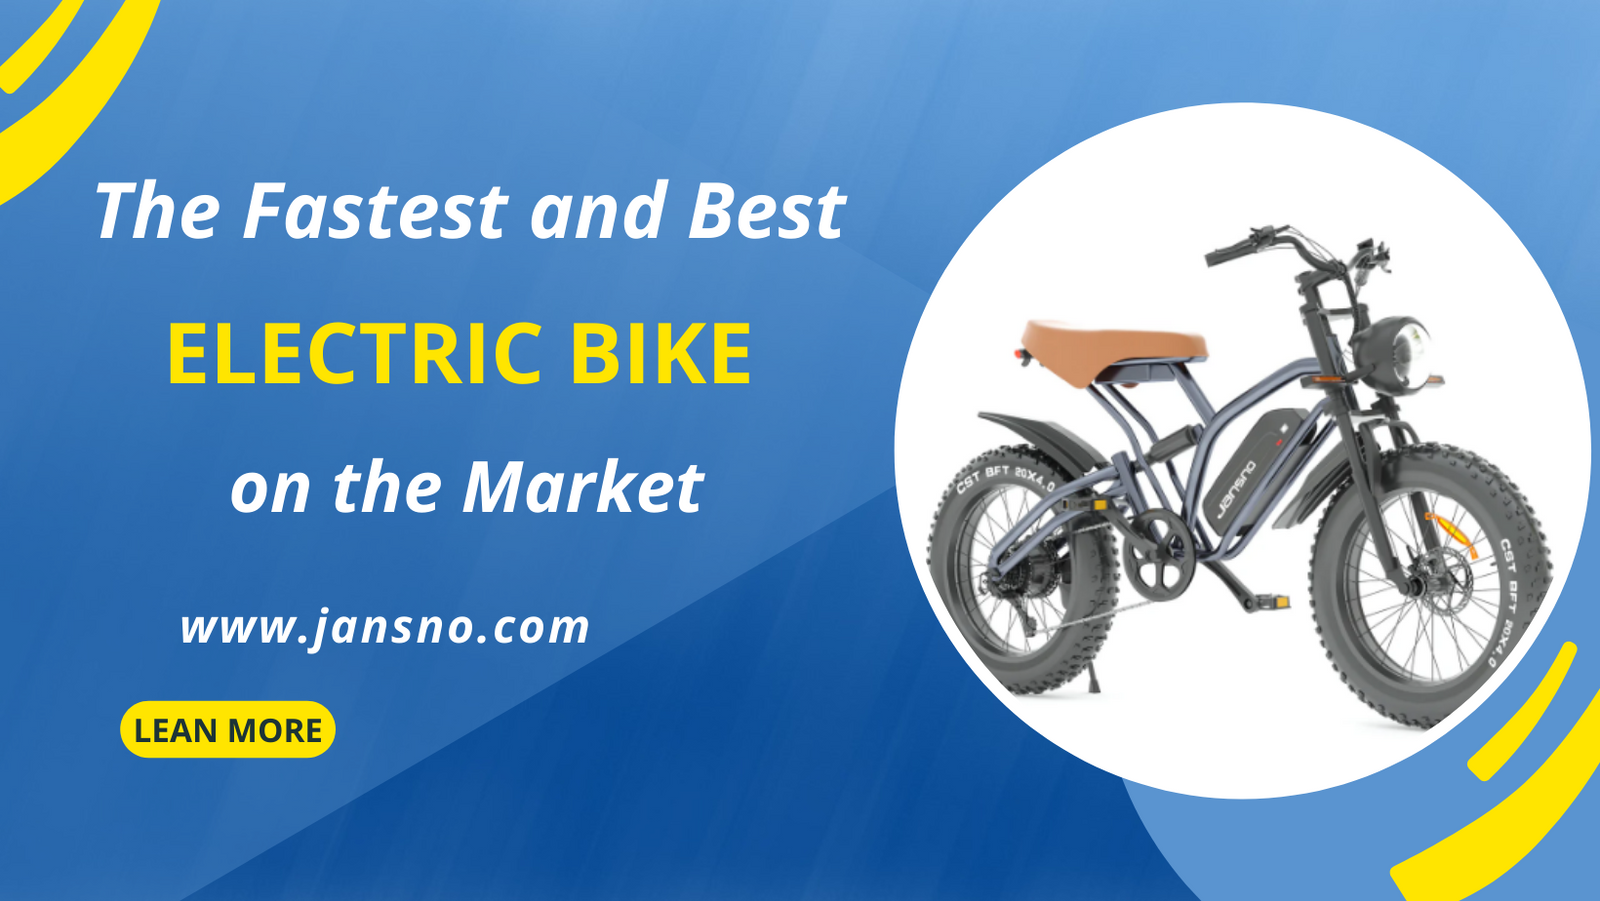 The Fastest and Best Electric Bike on the Market